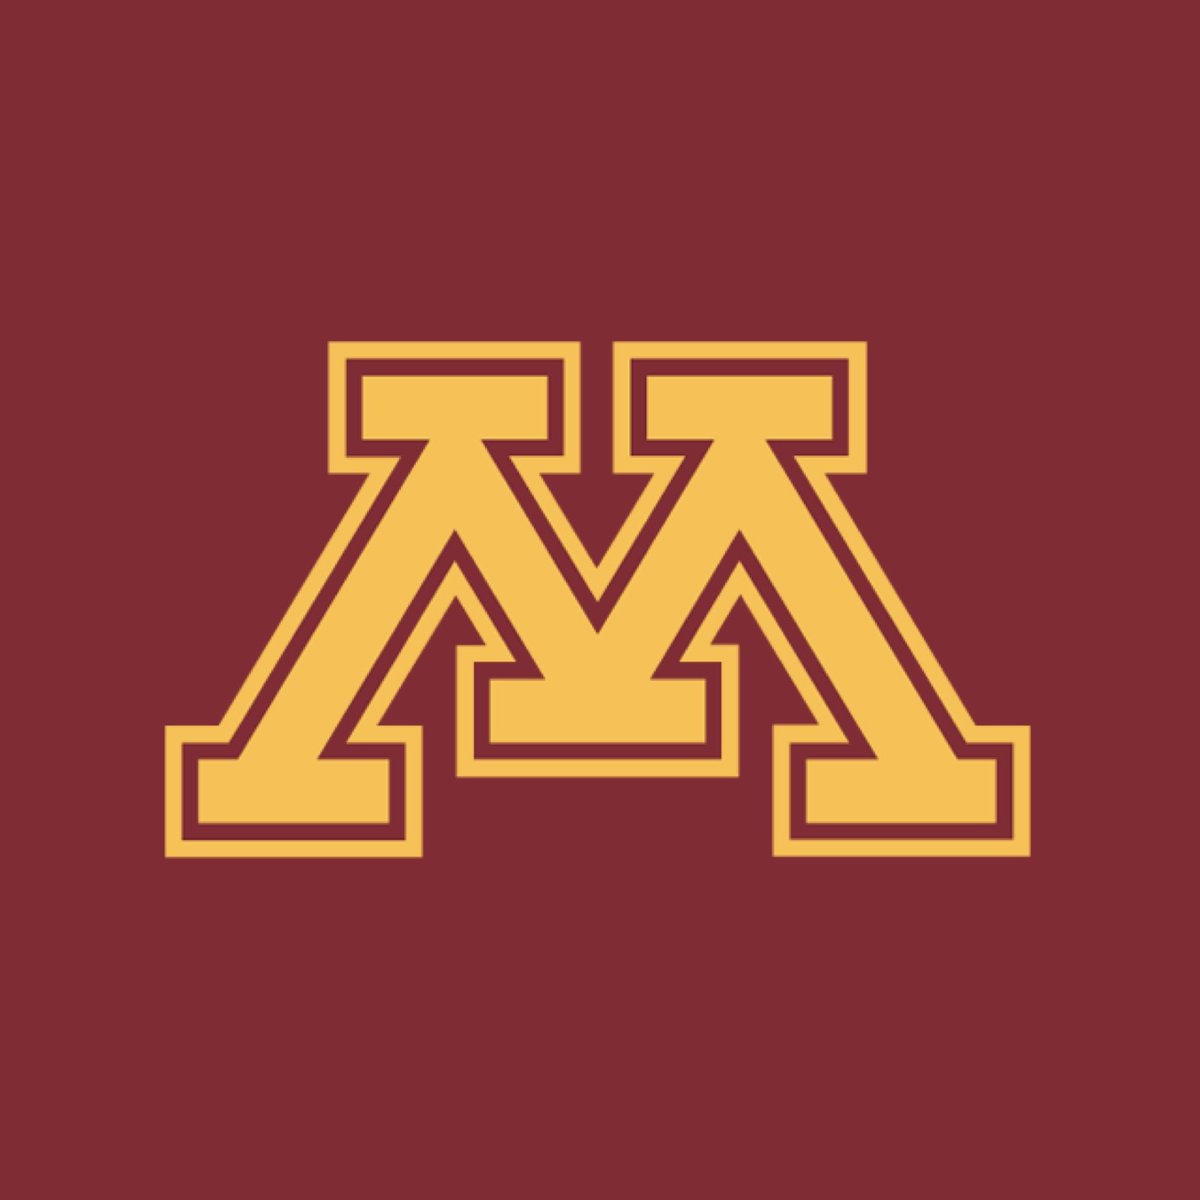 After a great conversation with @CoachKoehler, I have been blessed with an offer from the University of Minnesota!! #SkiUMah @GopherFootball @_pcpirates @Epic7Midwest